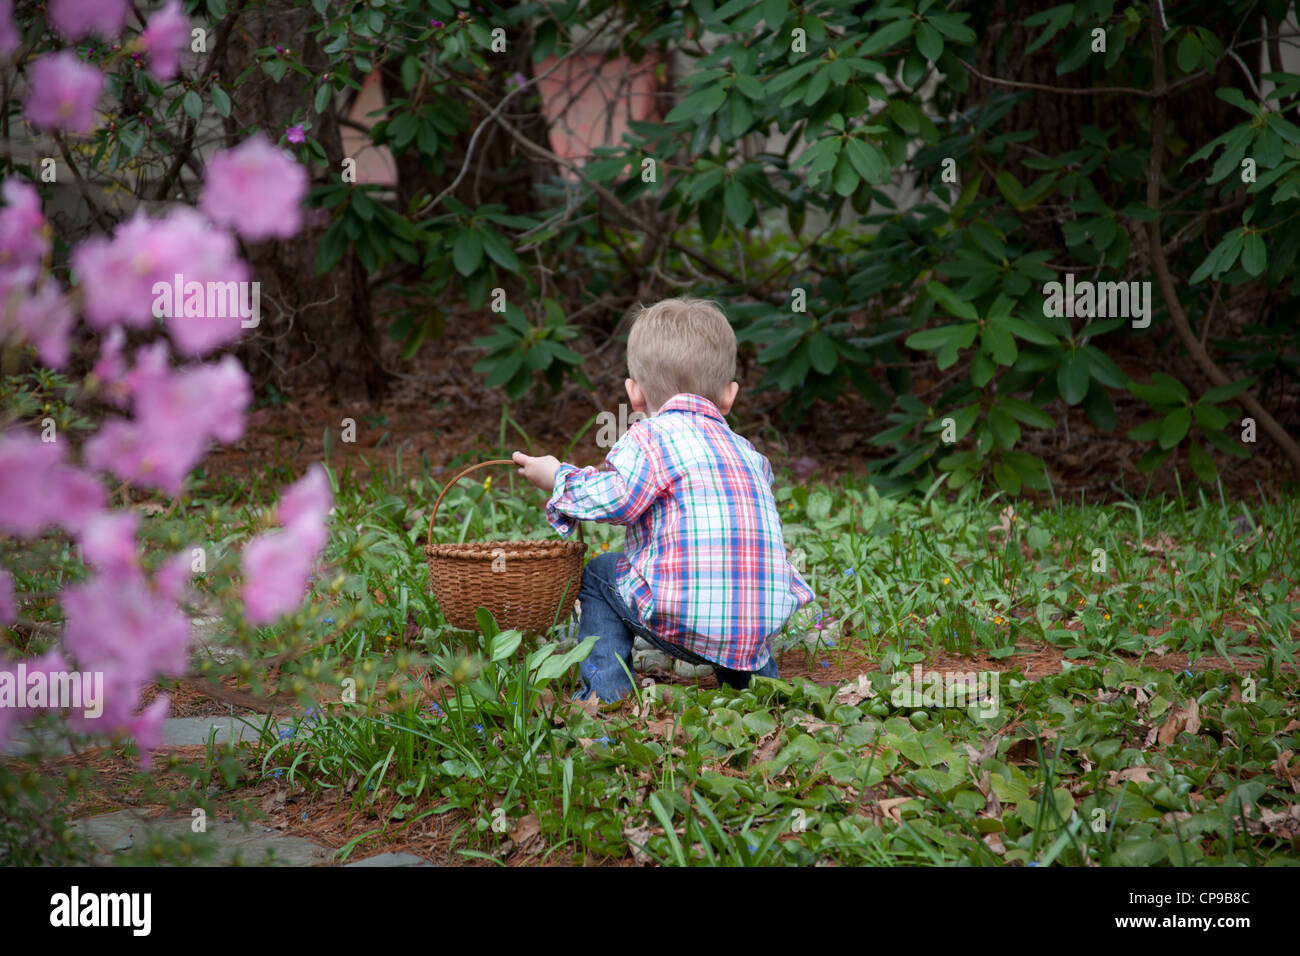 Young Boy With Basket Kneeling in Garden Stock Photo